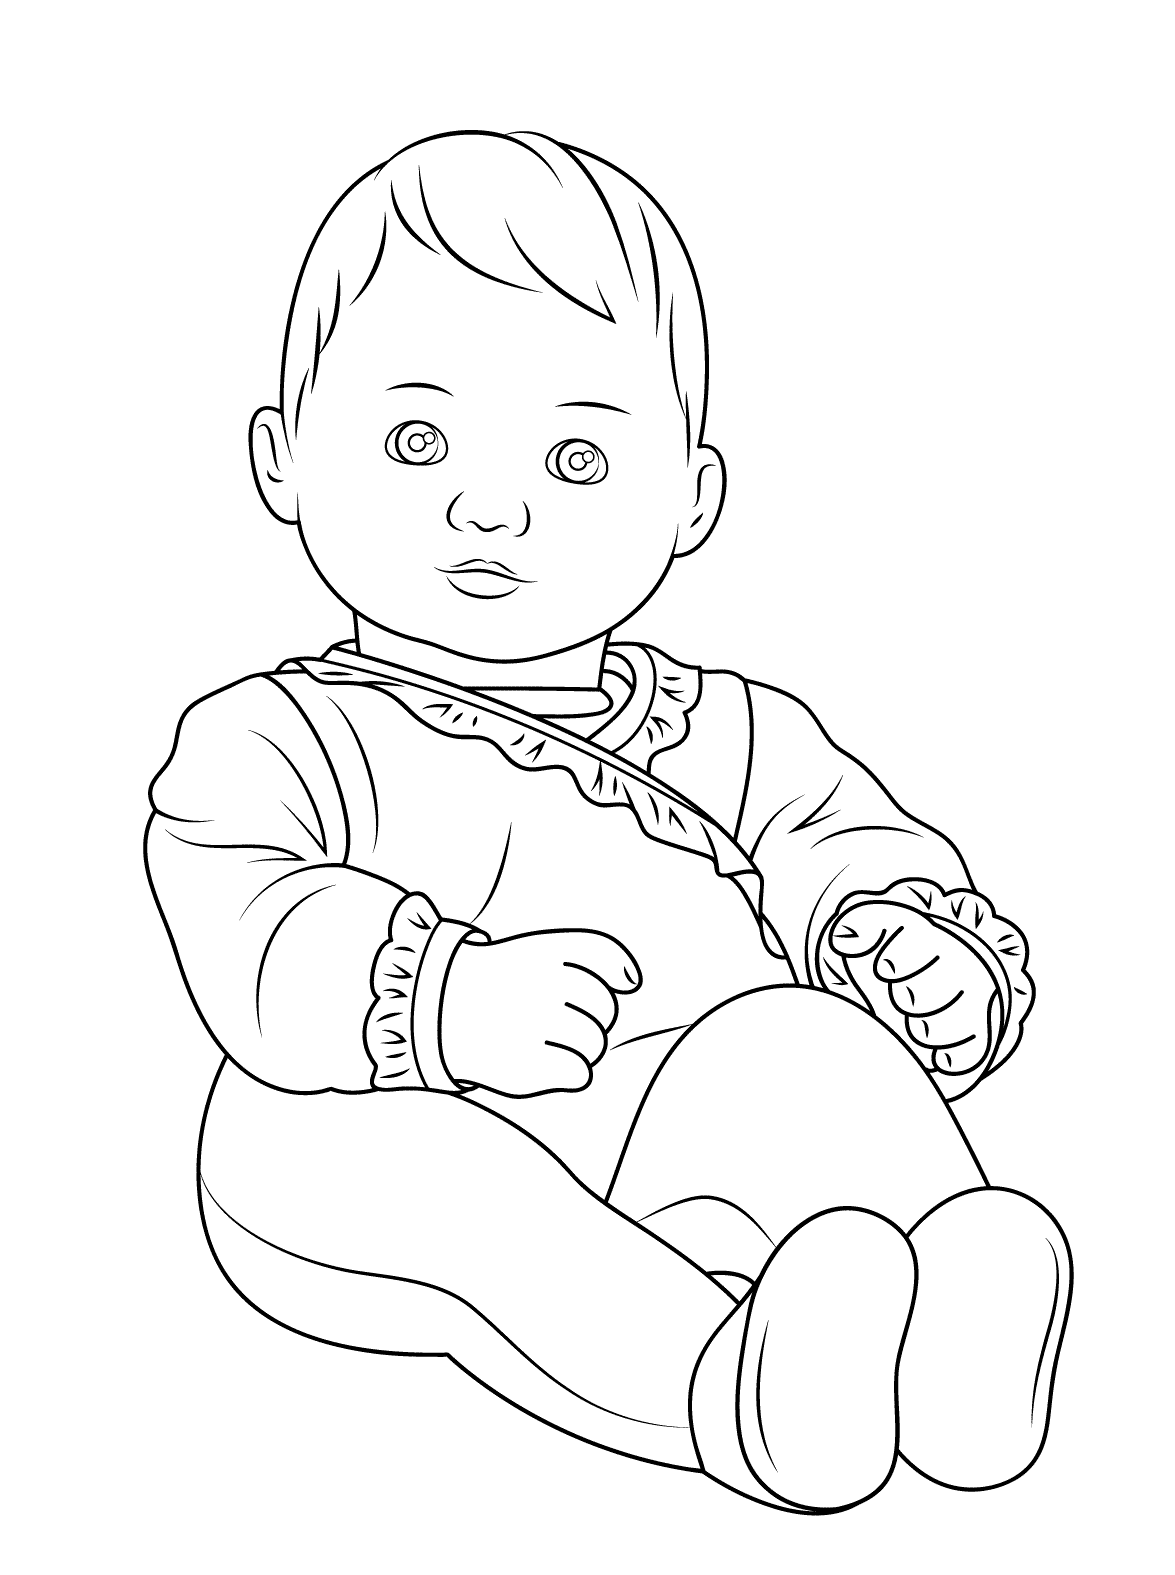 girl colering pages moxie girlz coloring pages card ideas coloring pages girl pages colering 